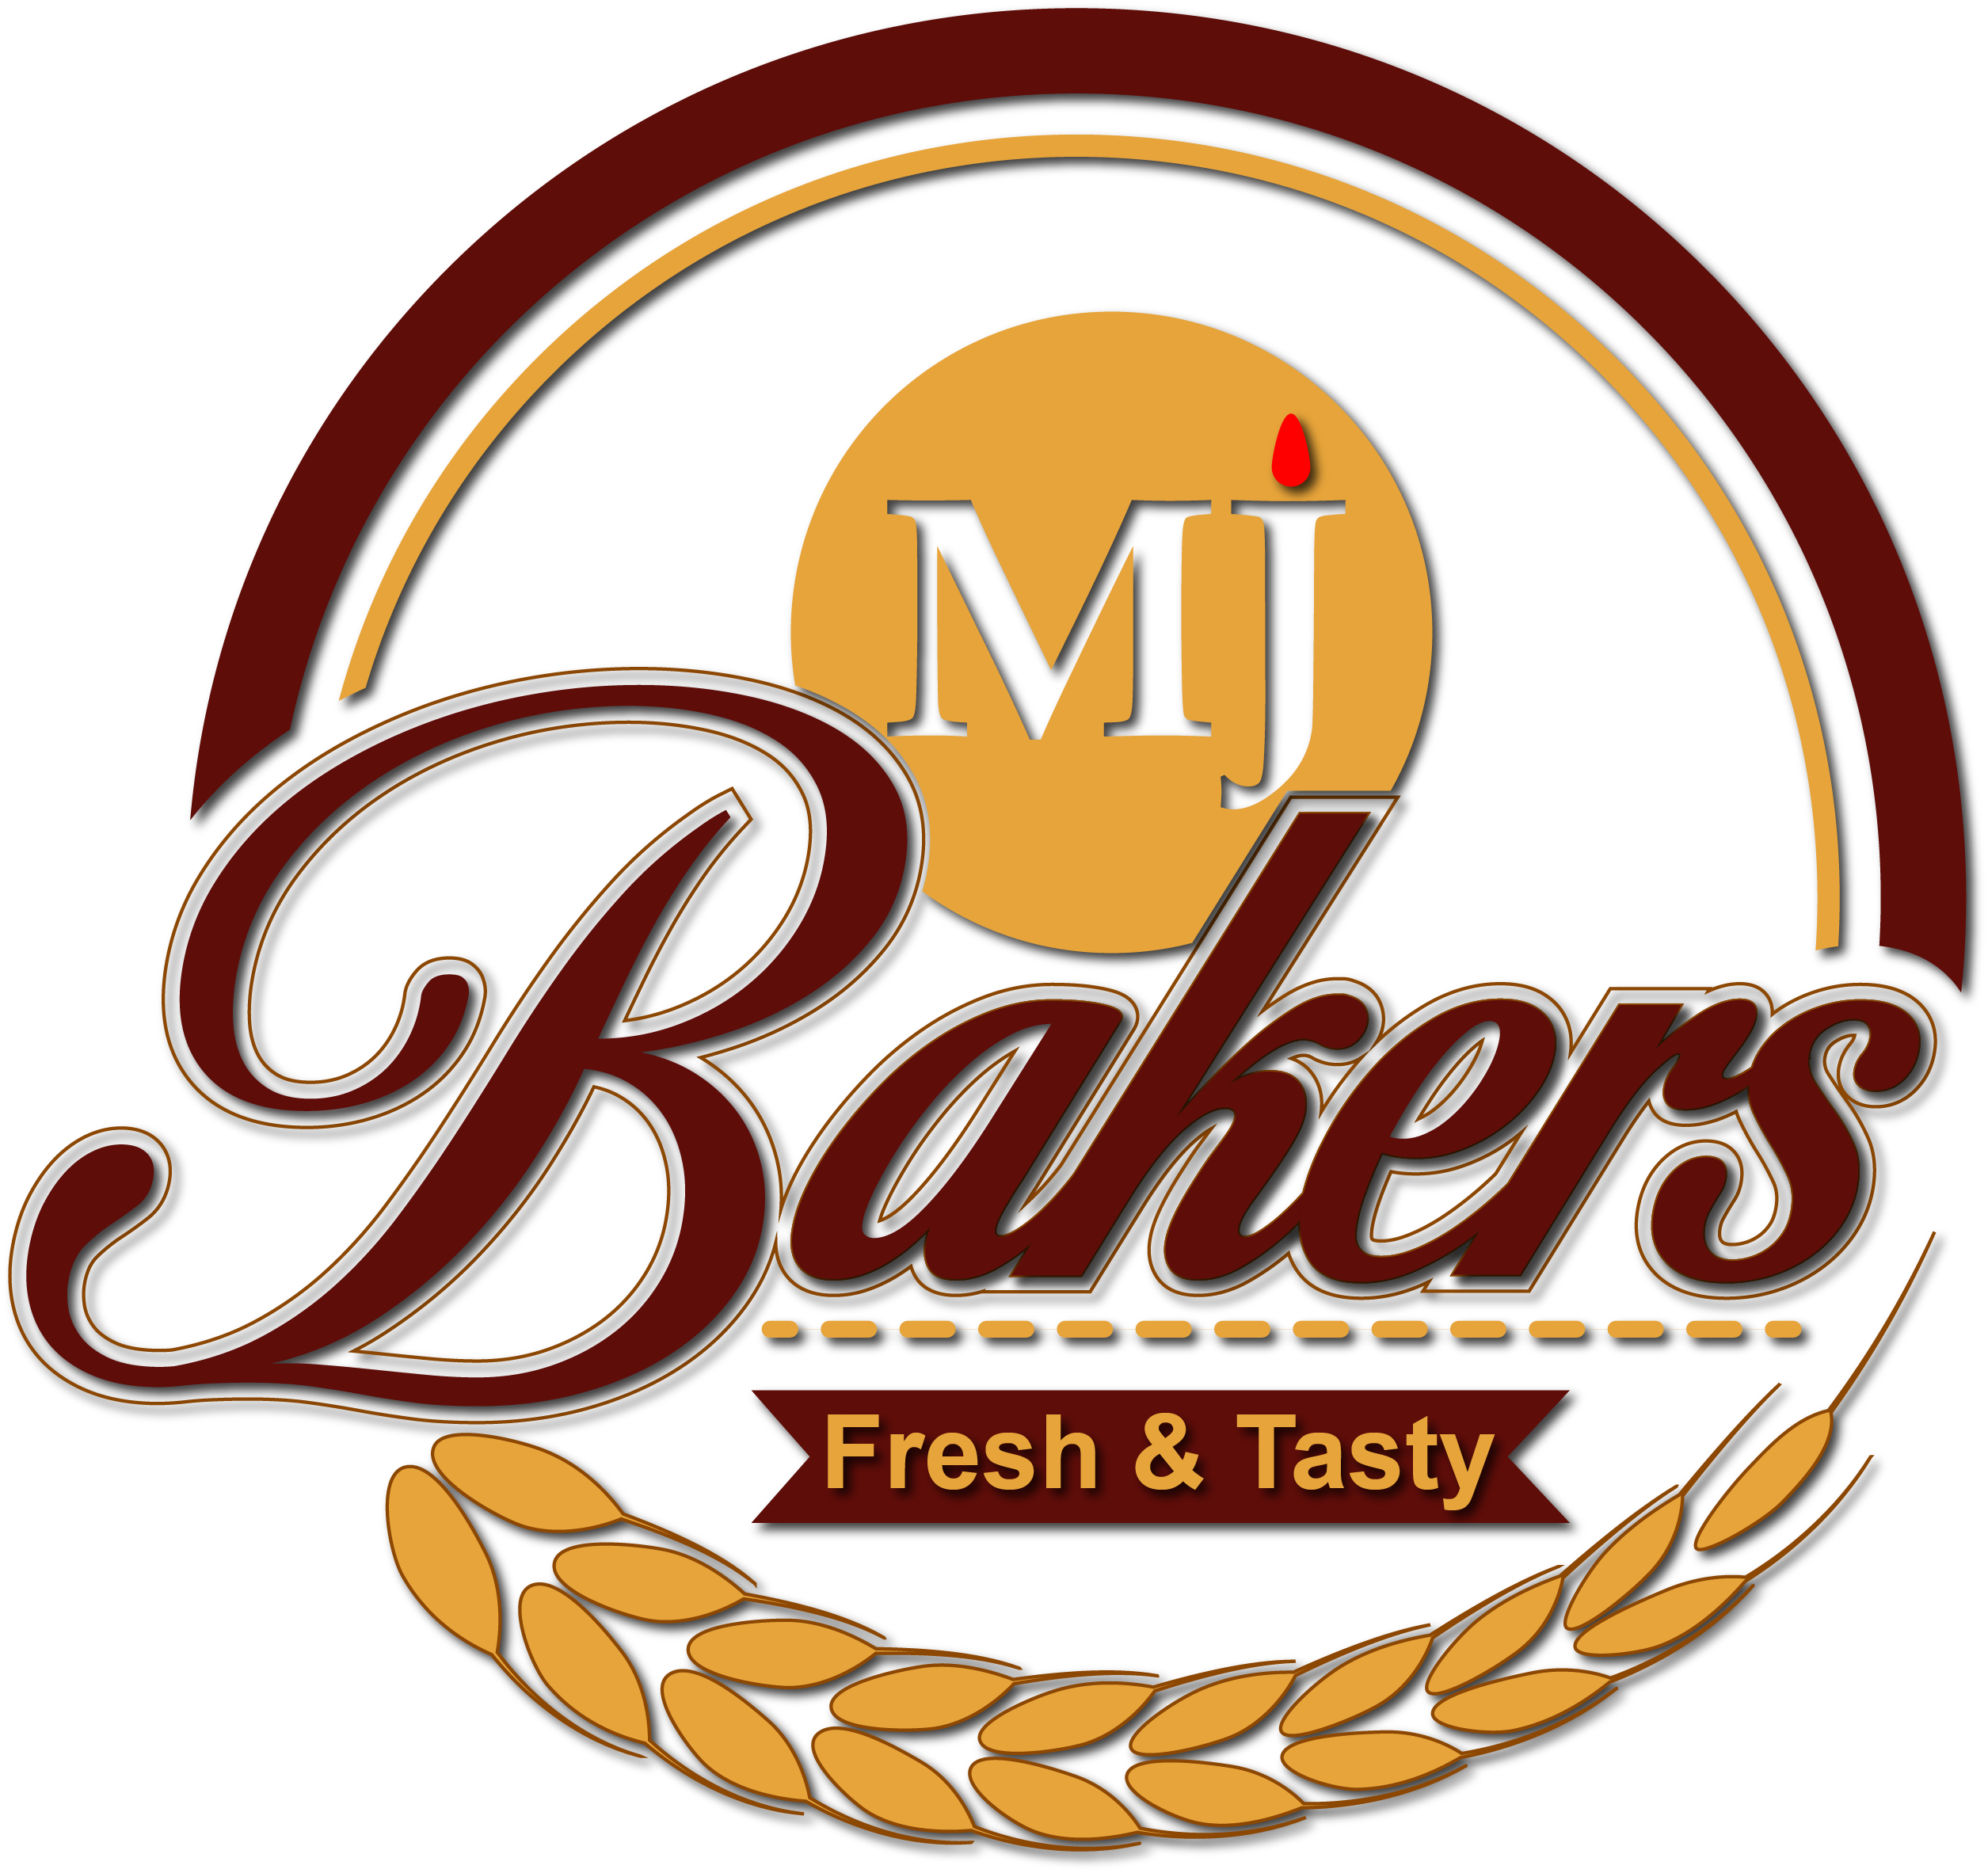 MJ bakers - Bakery Product Brand of India,rajgarh,Hotels & Resorts,Free Classifieds,Post Free Ads,77traders.com